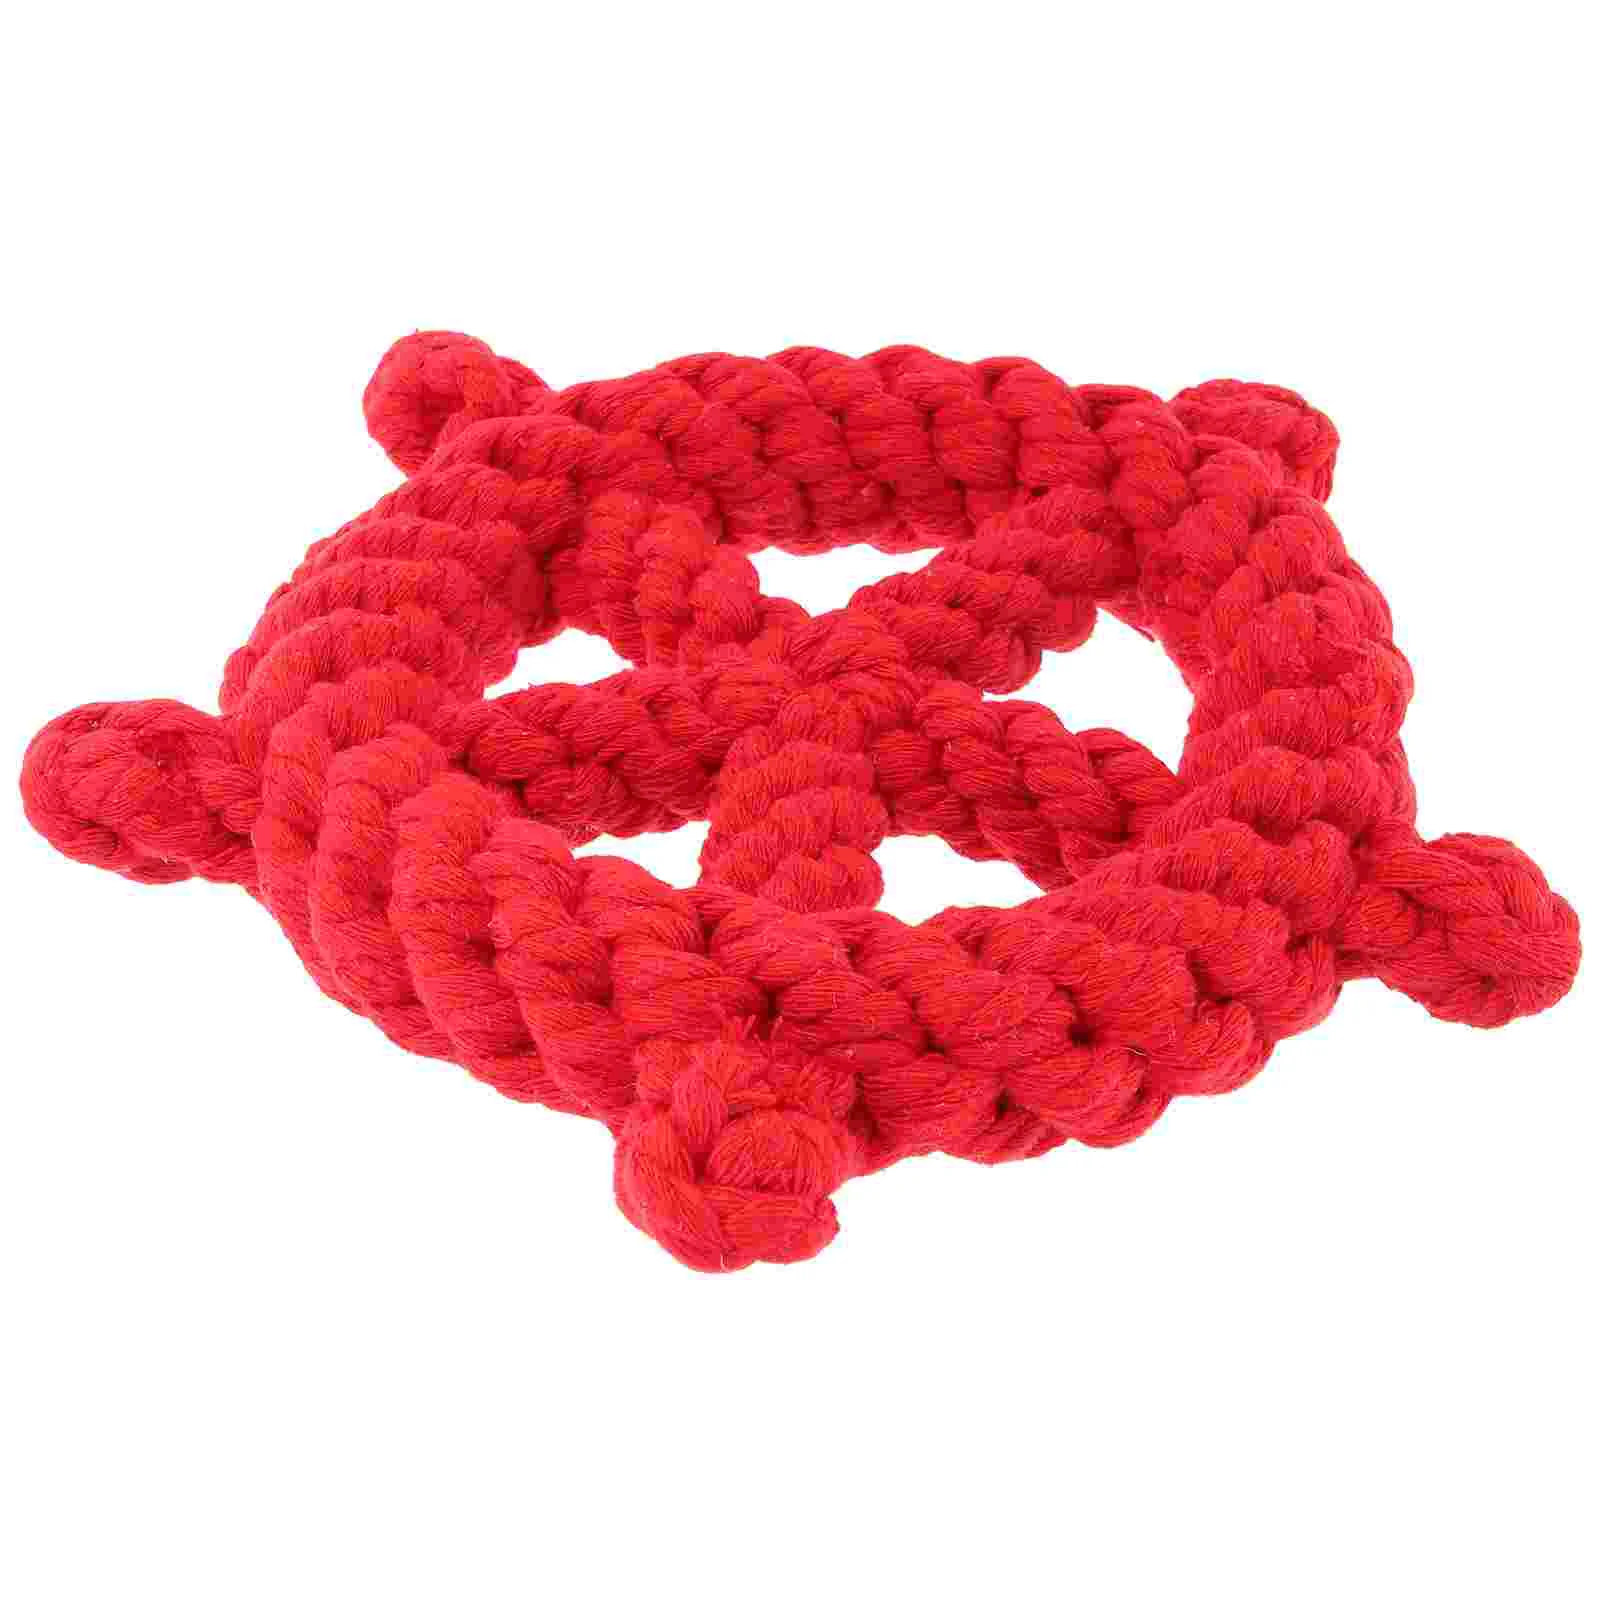 

Chew Teething Interactive Cotton Rope Playing for Kitten Puppy Cat Molar Educational Plaything Toys Ship Wheel Design